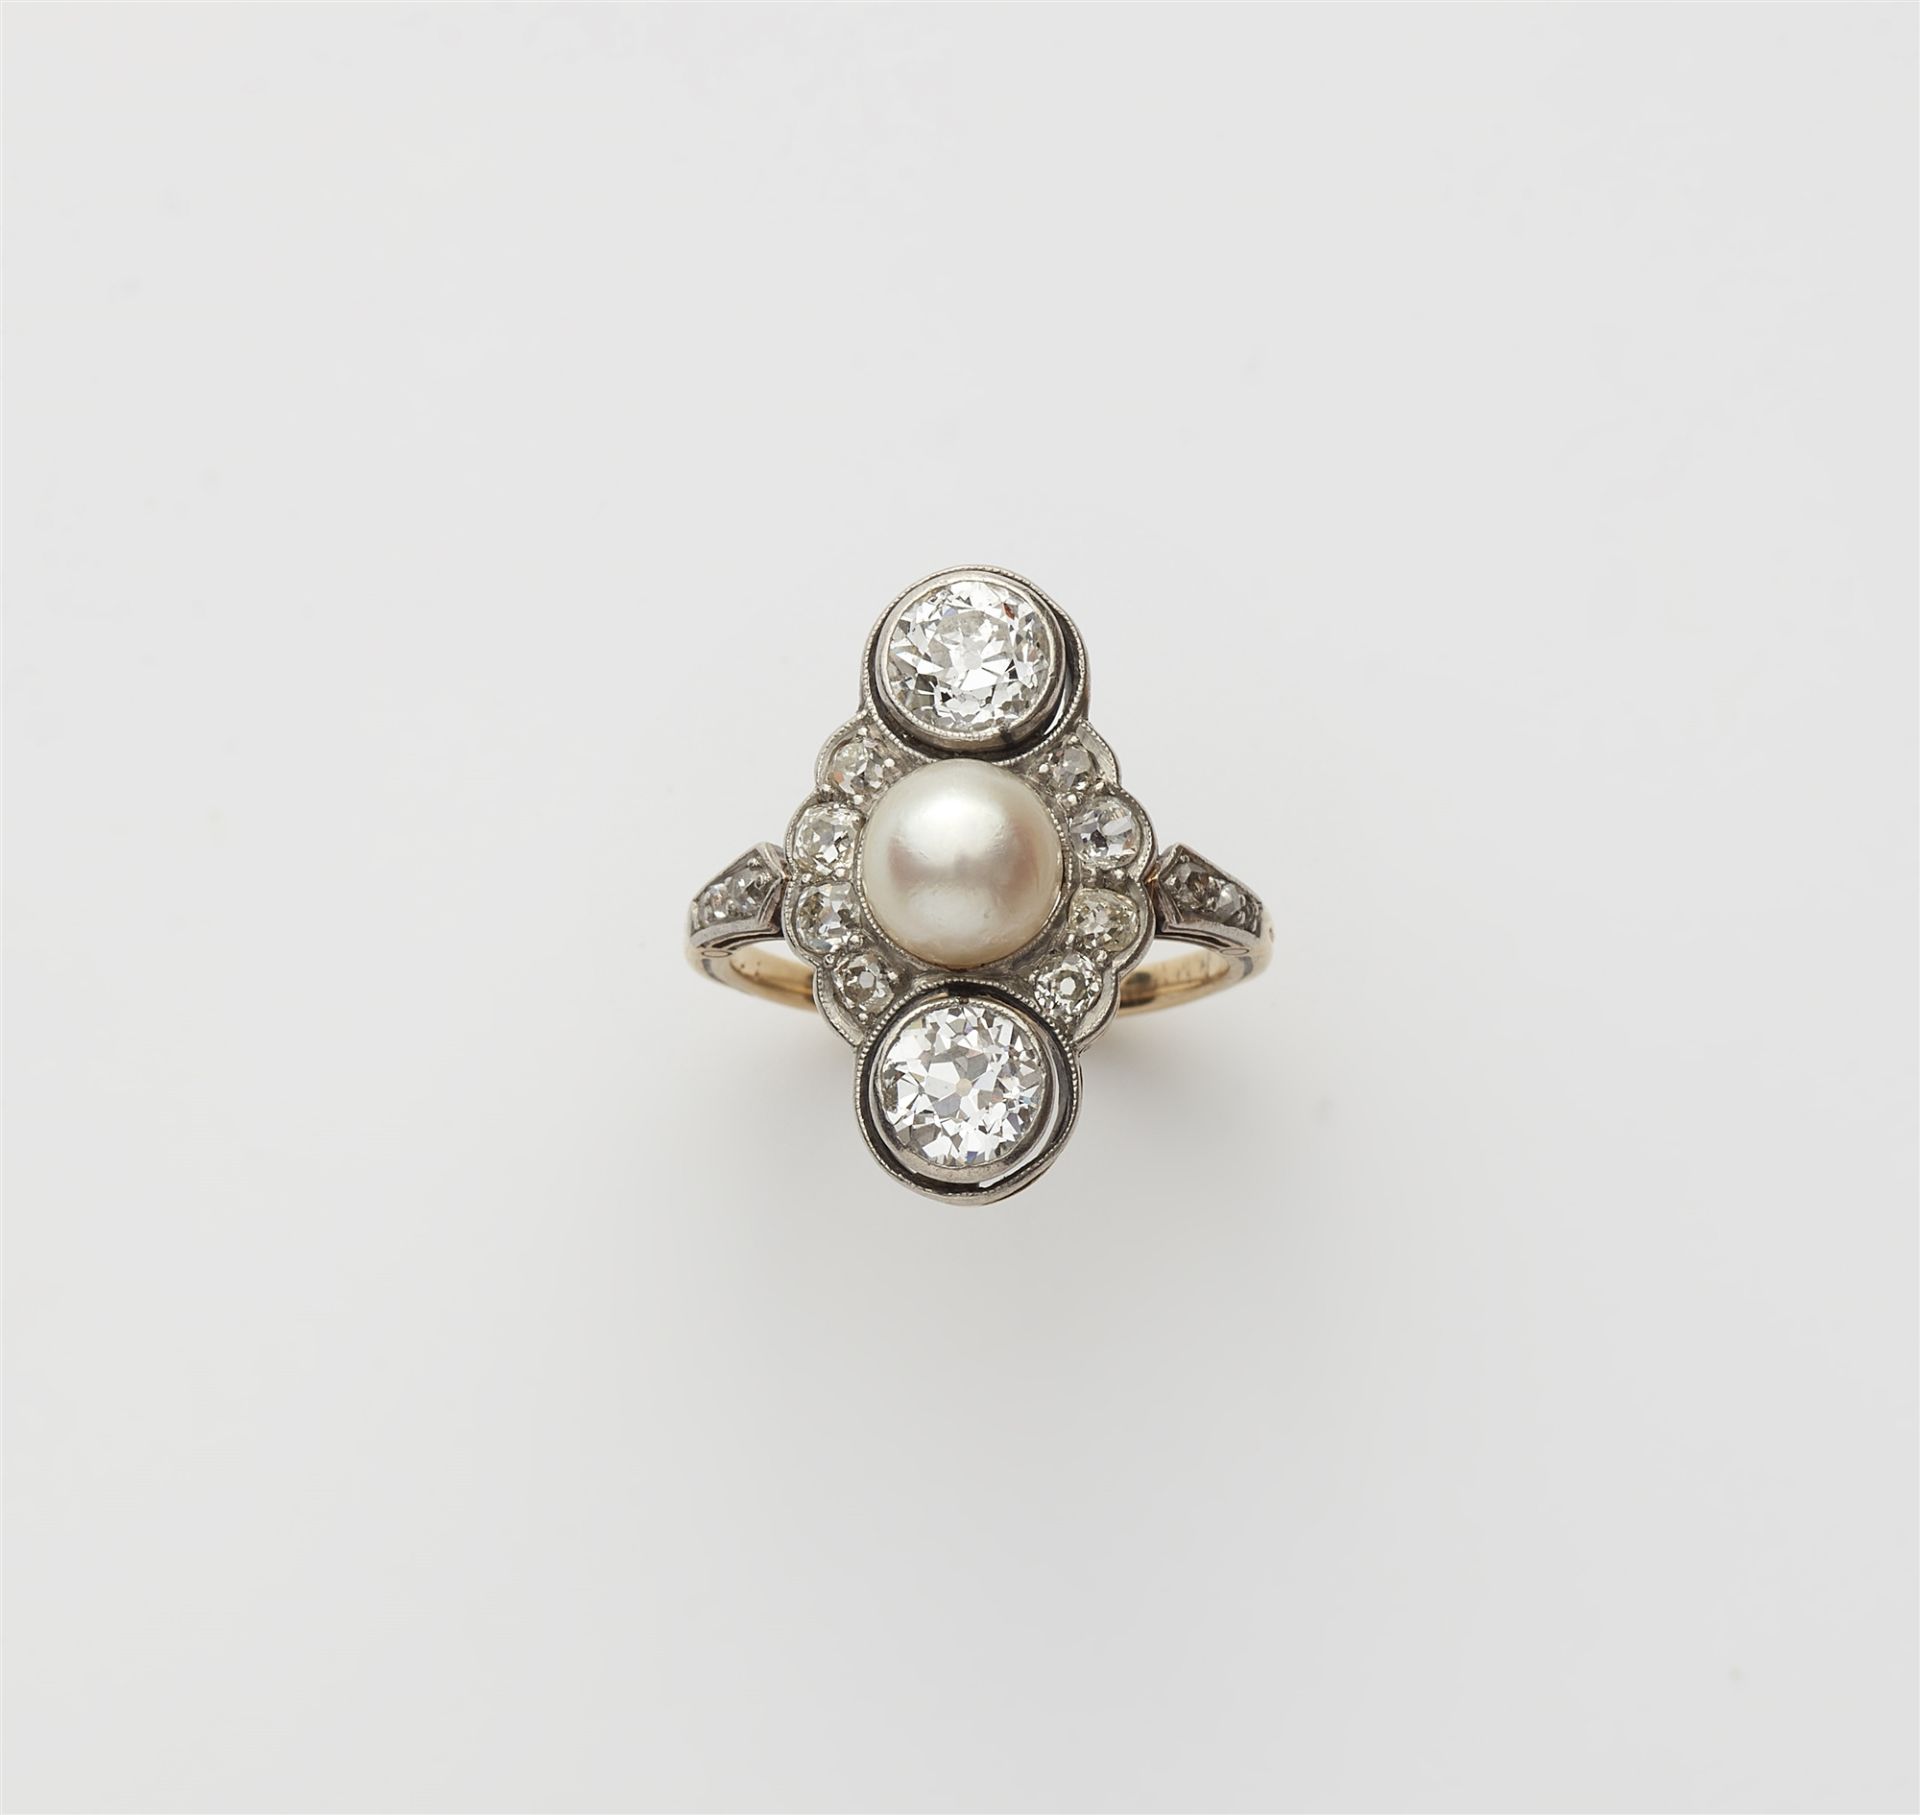 A platinum 14k gold diamond and natural pearl Belle Epoque ring.